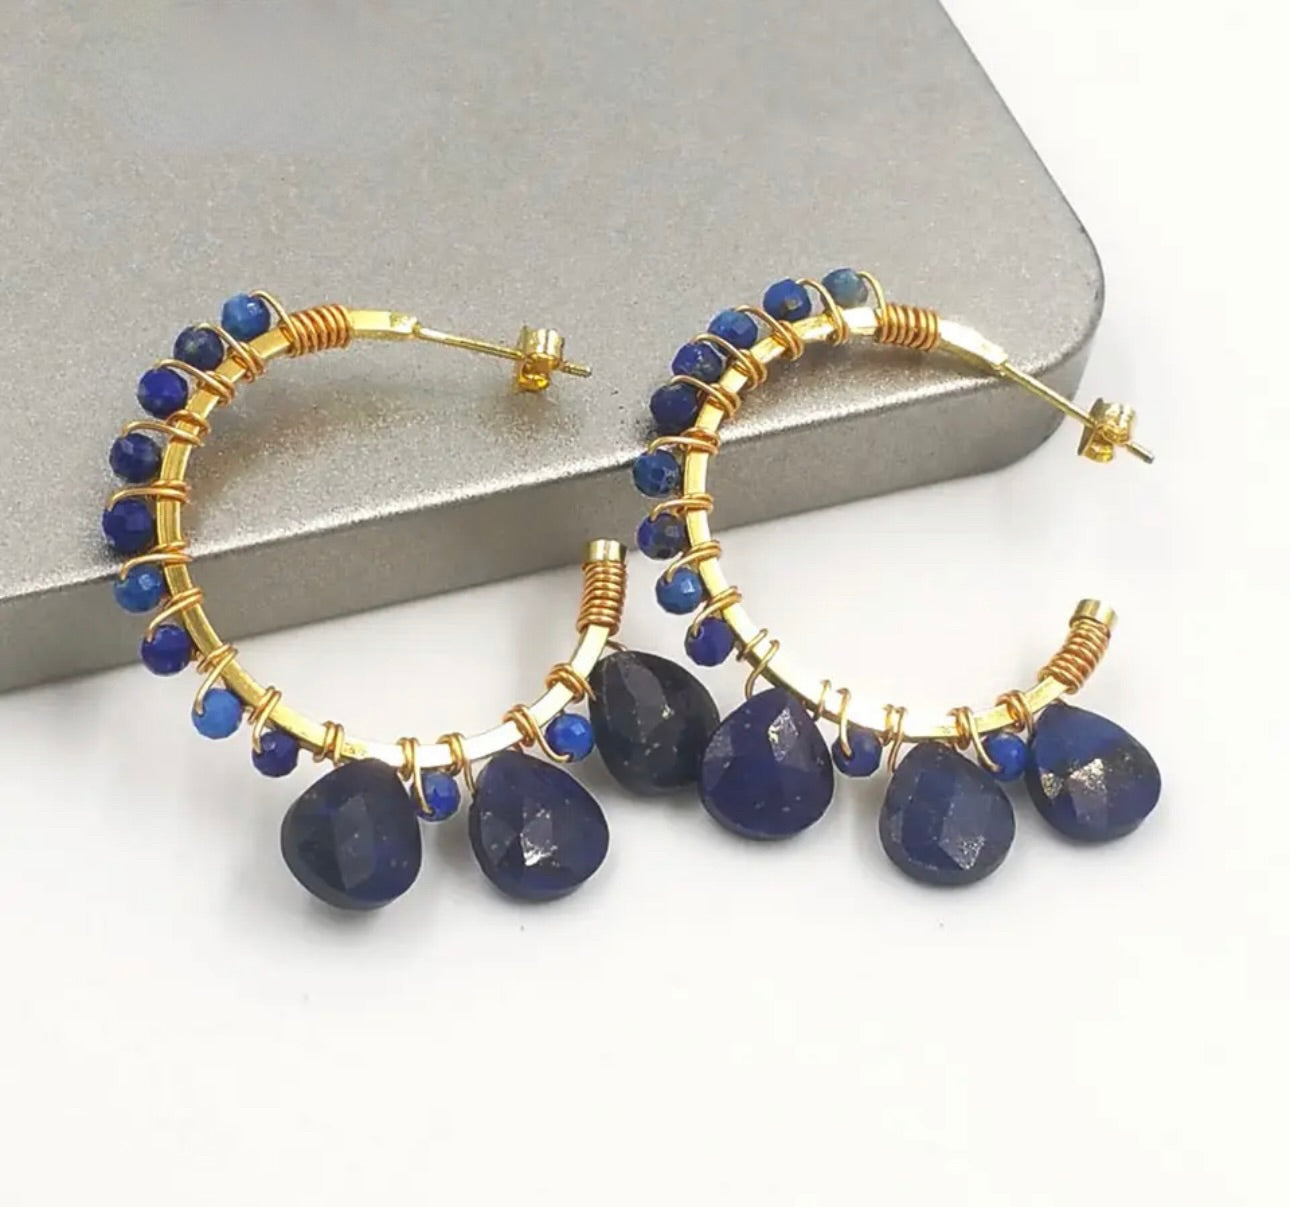 Stainless steel Hoops with Faceted Lapis and Teardrop Gemstones